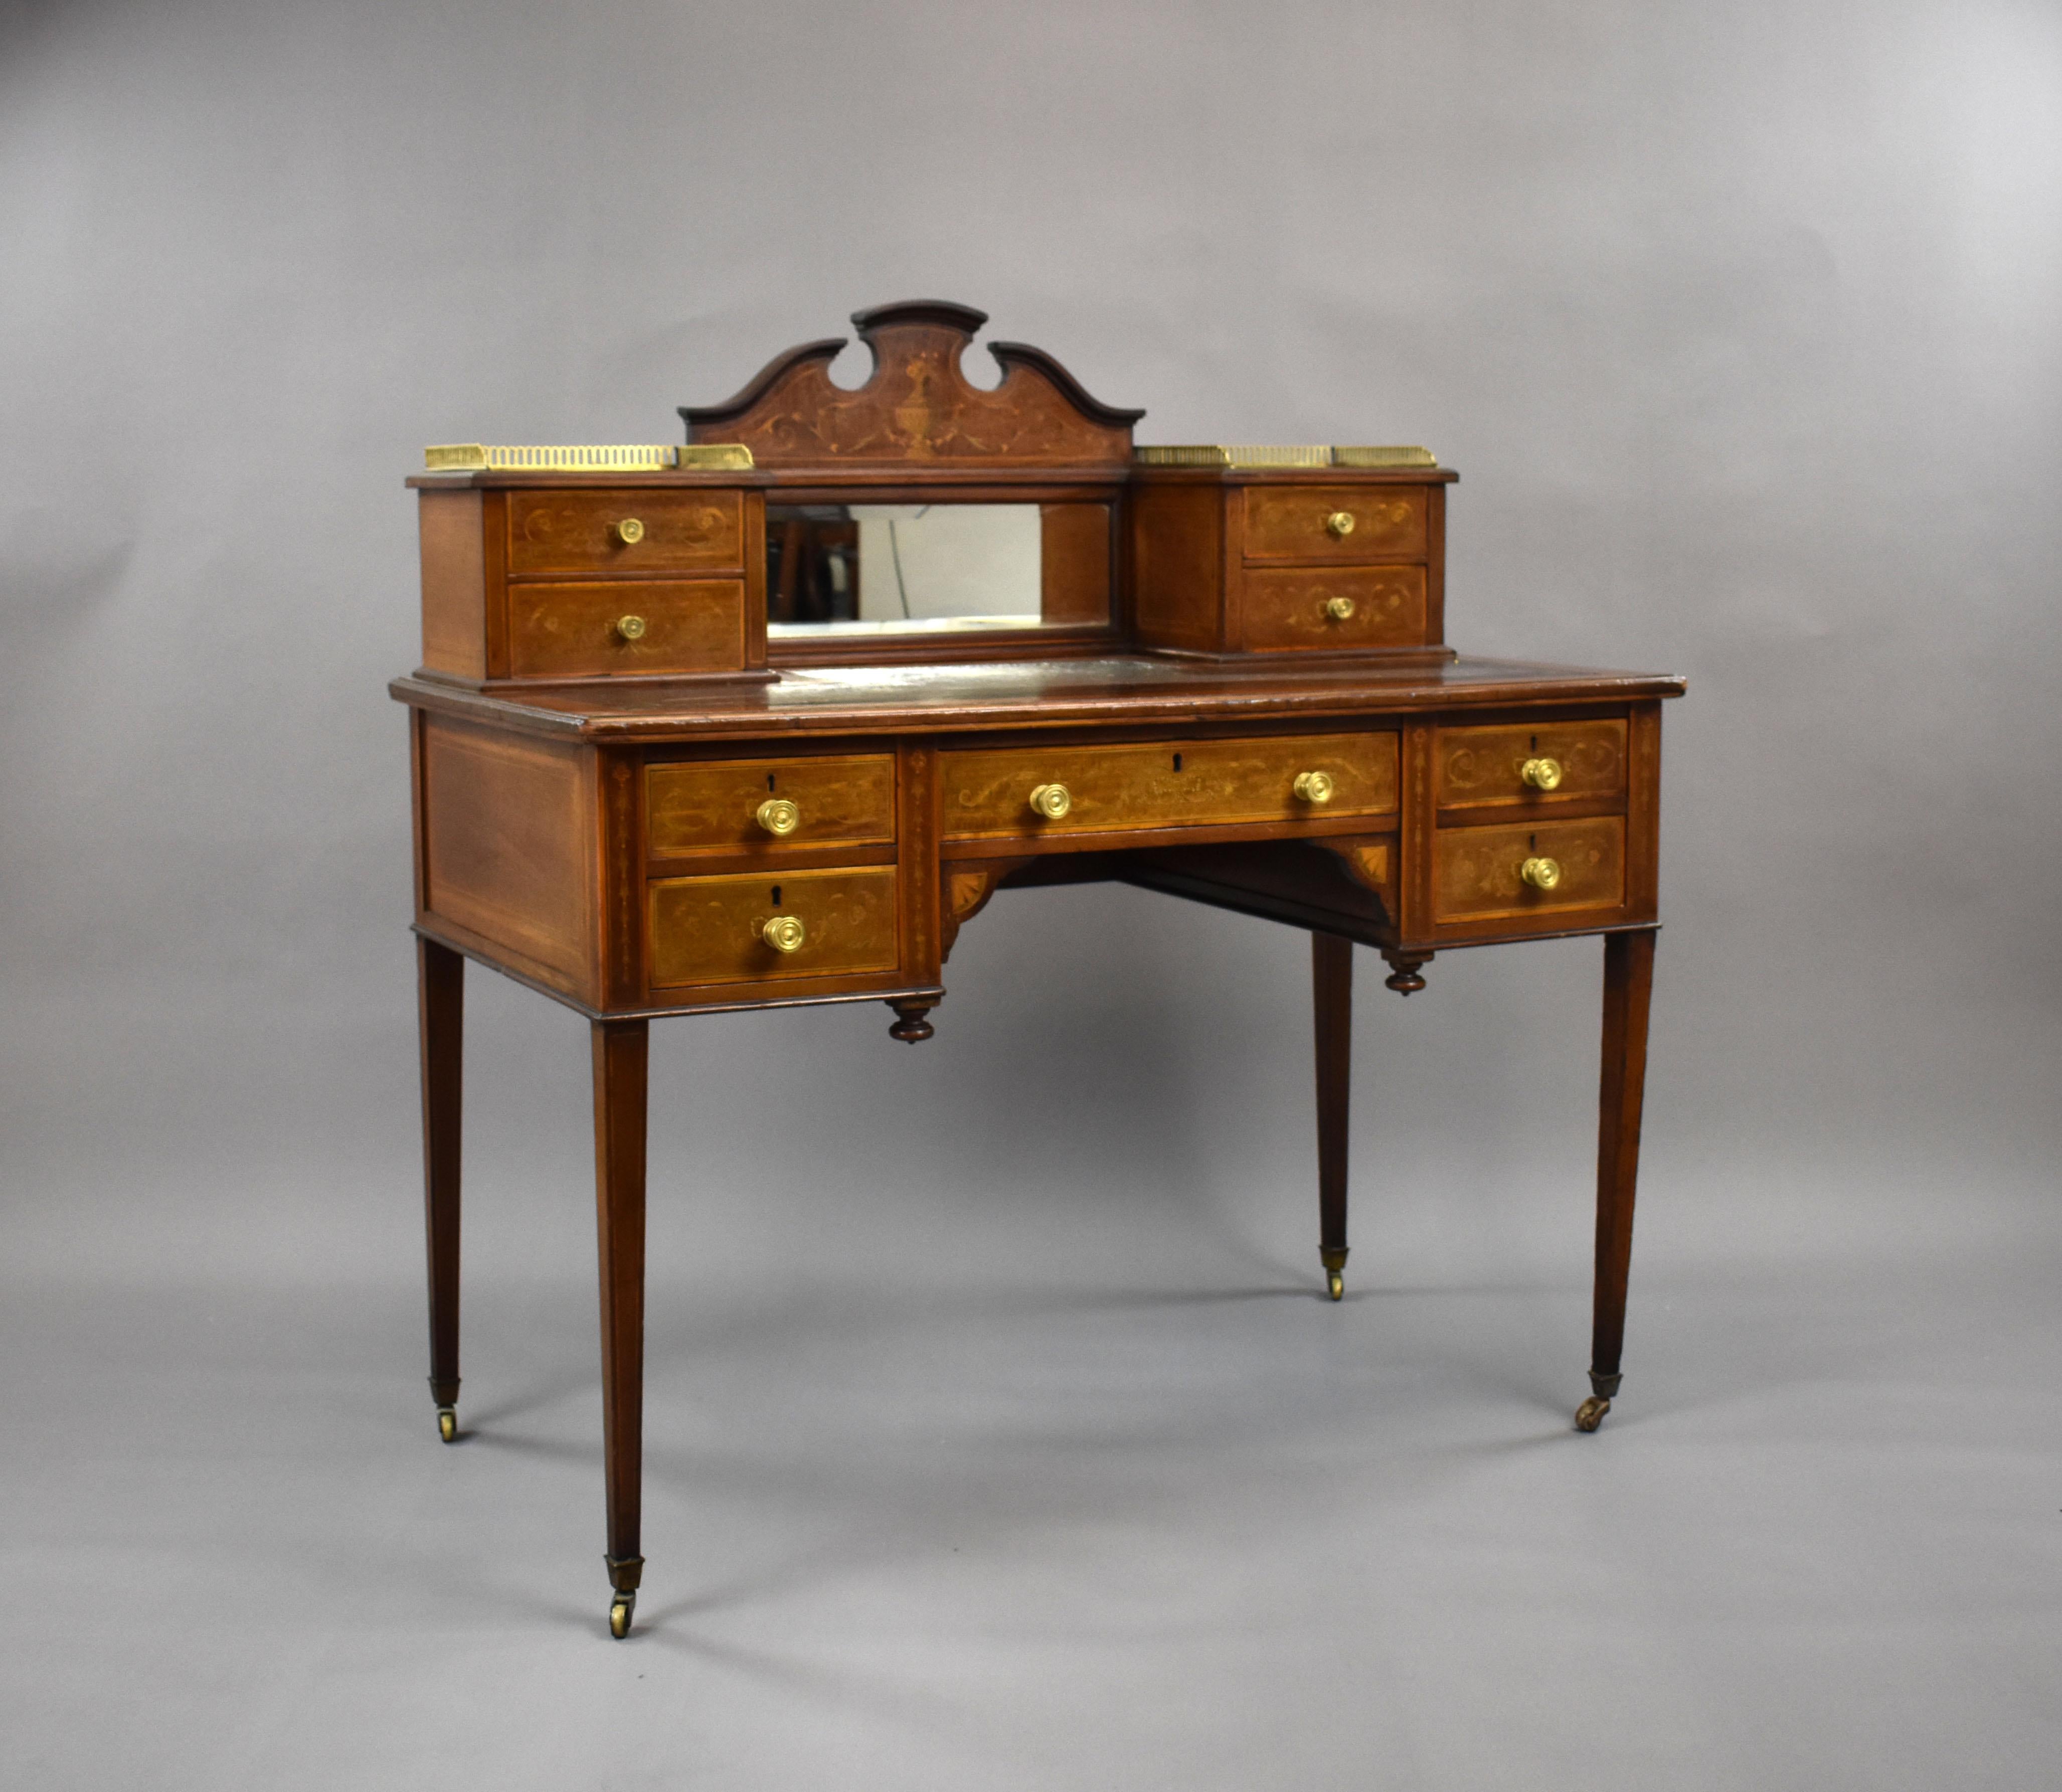 For sale is a good quality Victorian Mahogany, Satinwood Banded and Marquetry Inlaid Writing Desk by James Shoolbred & Co, the moulded pediment above a bevelled glass mirror plate flanked by four small drawers and a pierced brass gallery, the red